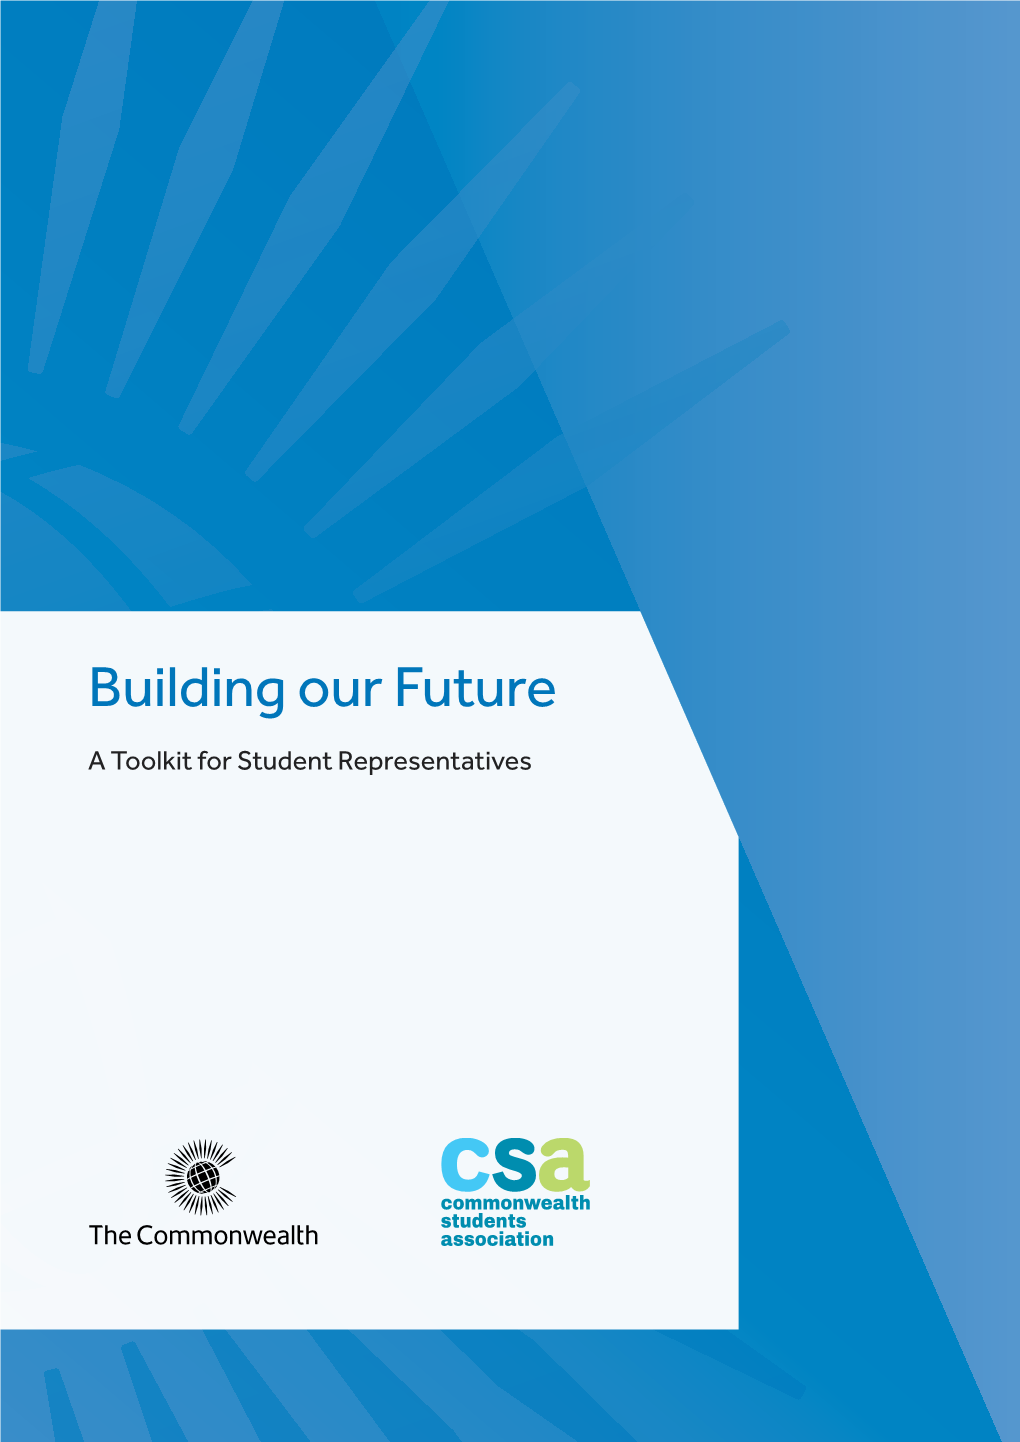 Building Our Future – a Toolkit for Student Representation